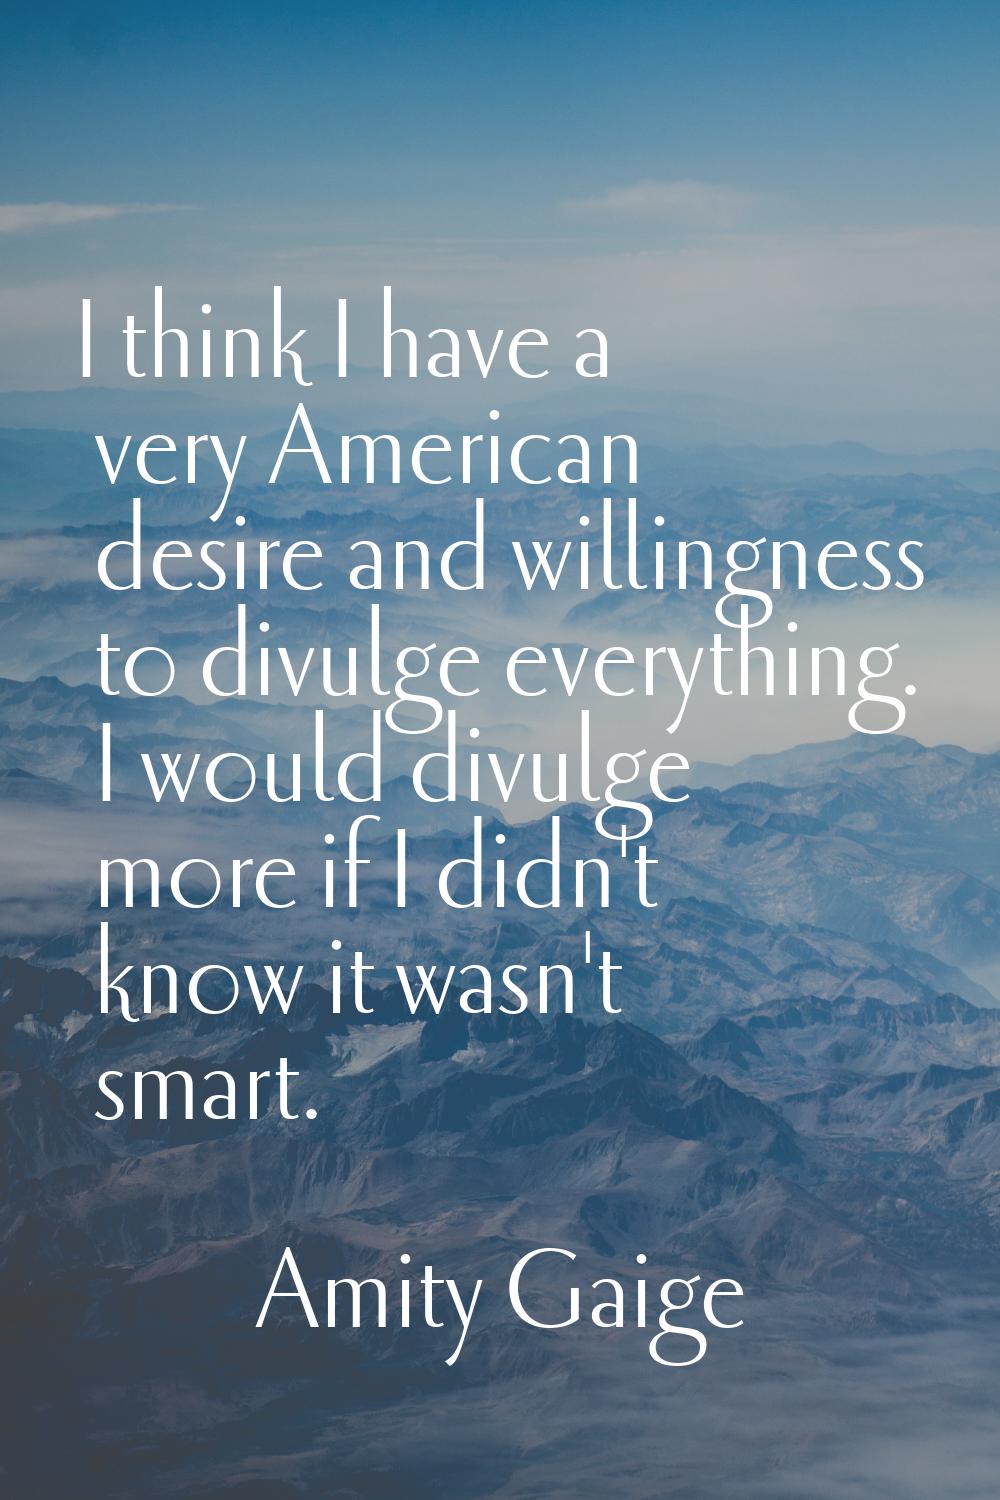 I think I have a very American desire and willingness to divulge everything. I would divulge more i